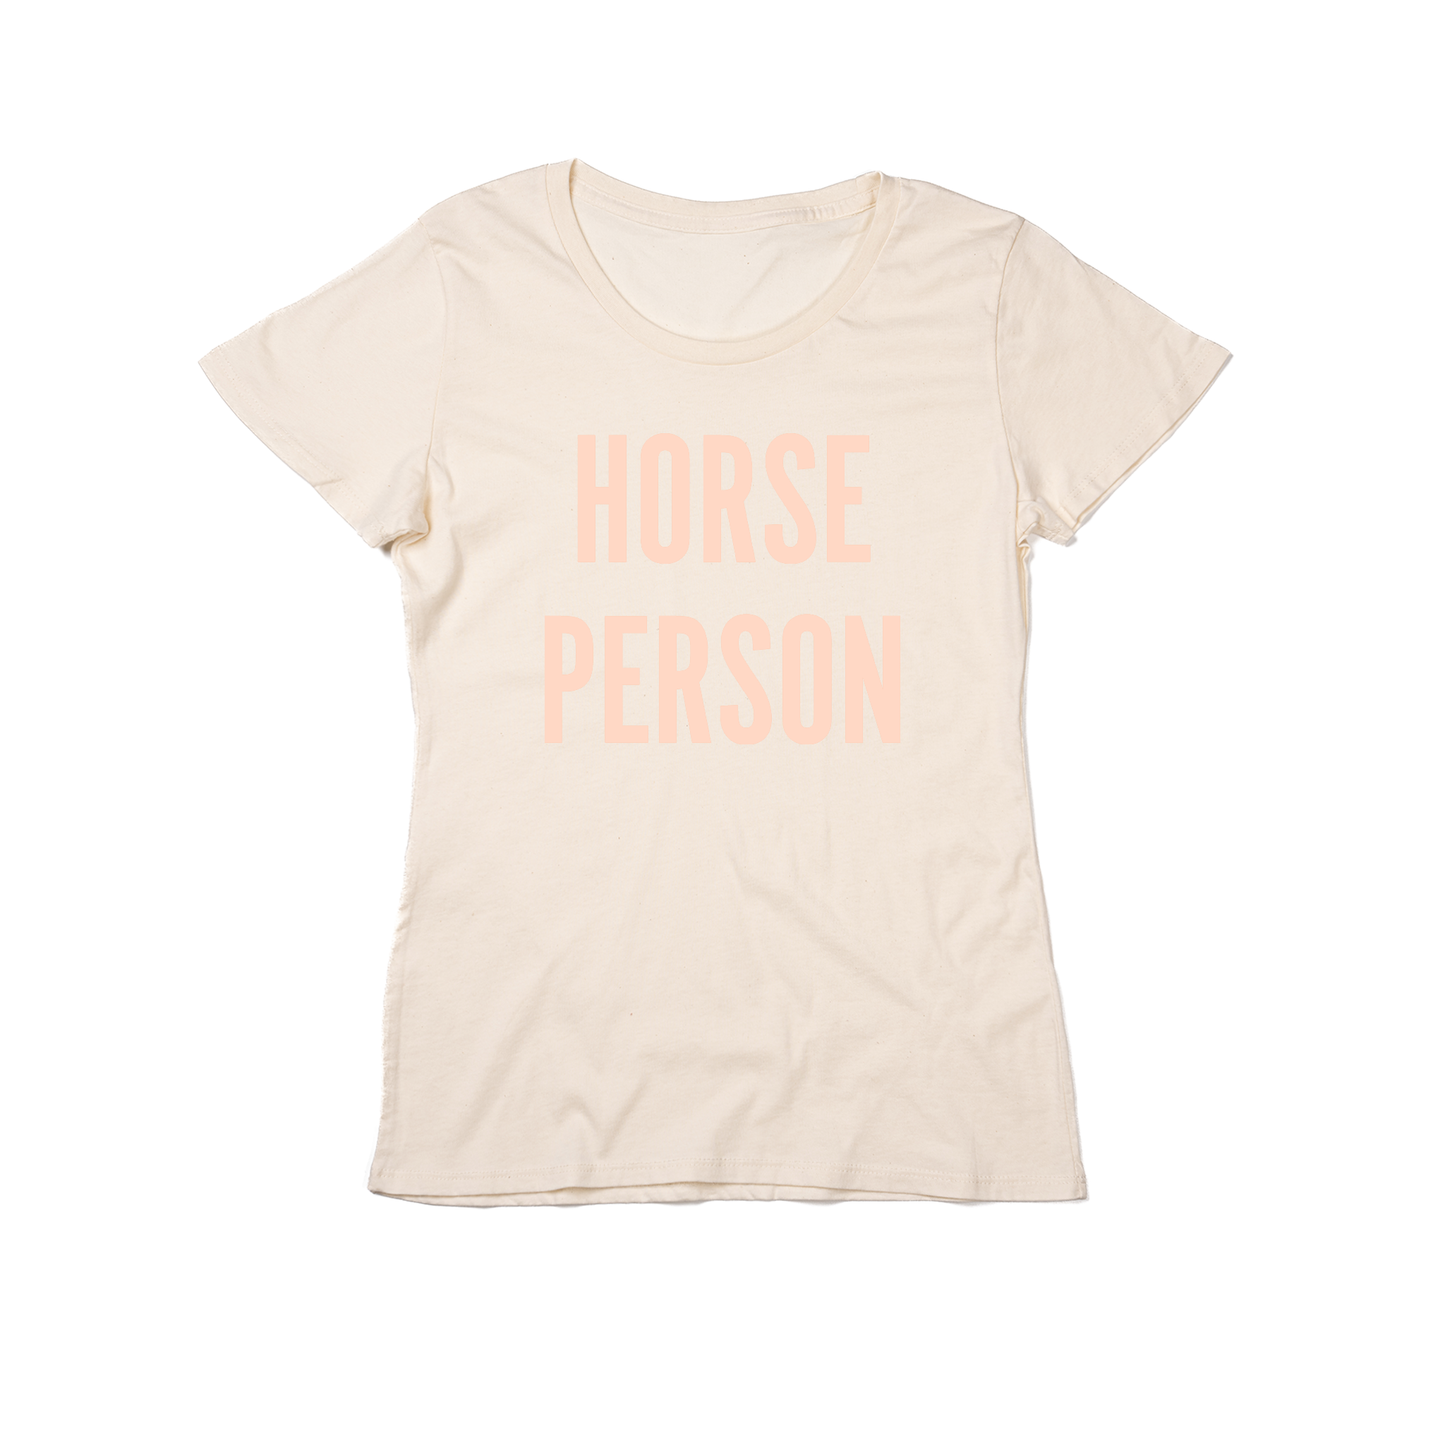 Horse Person (Peach) - Women's Fitted Tee (Natural)